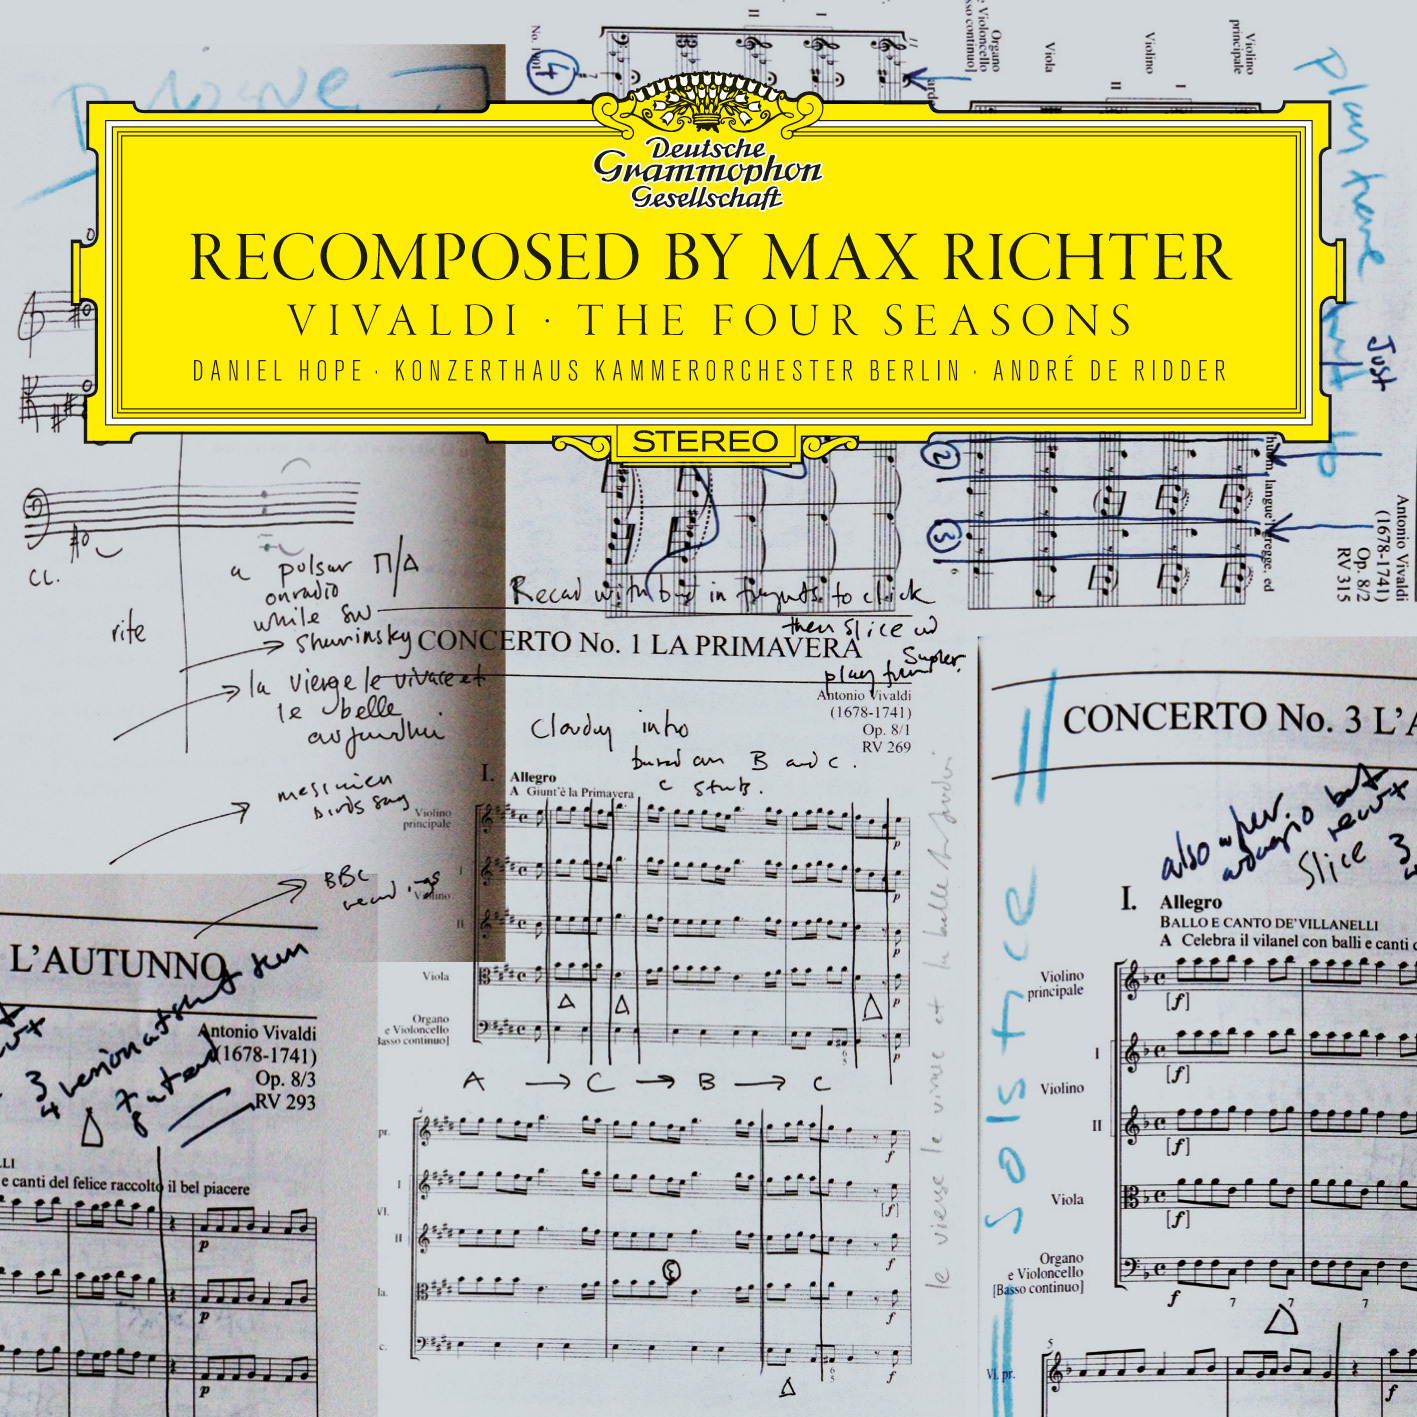 Max Richter - Recomposed By Max Richter - Vivaldi: The Four Seasons (2012) [HDTracks FLAC 24bit/96kHz]